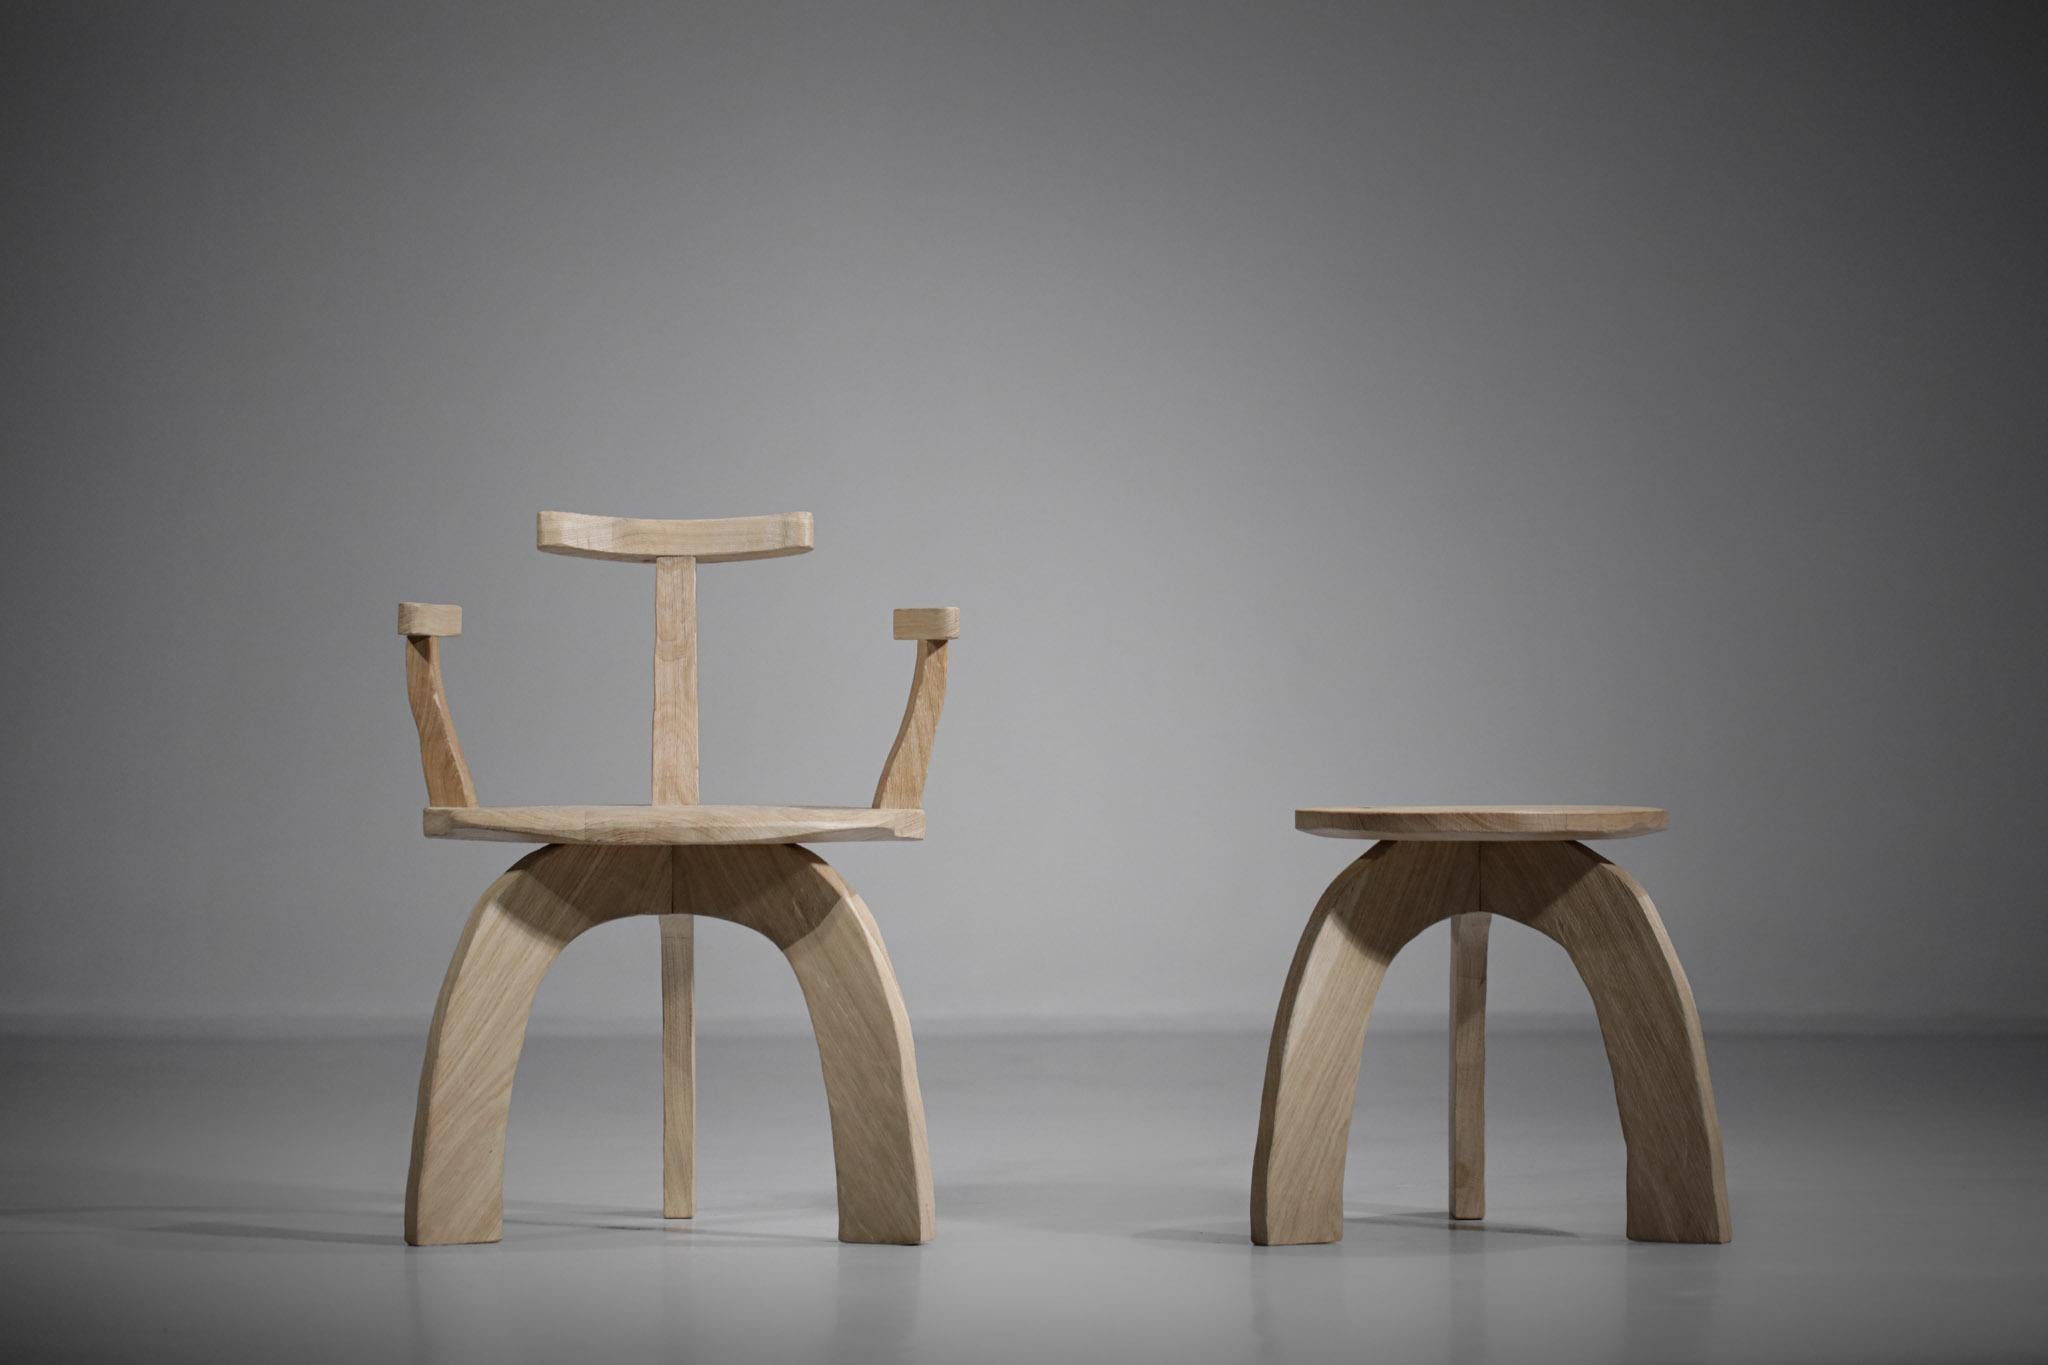 Danke galerie is pleased to present the latest creation of the cabinetmaker Vincent Vincent. This Ethnic stool in solid oak will bring a unique touch to your decoration. Designed with quality, comfort and sturdiness in mind, each piece by Vincent